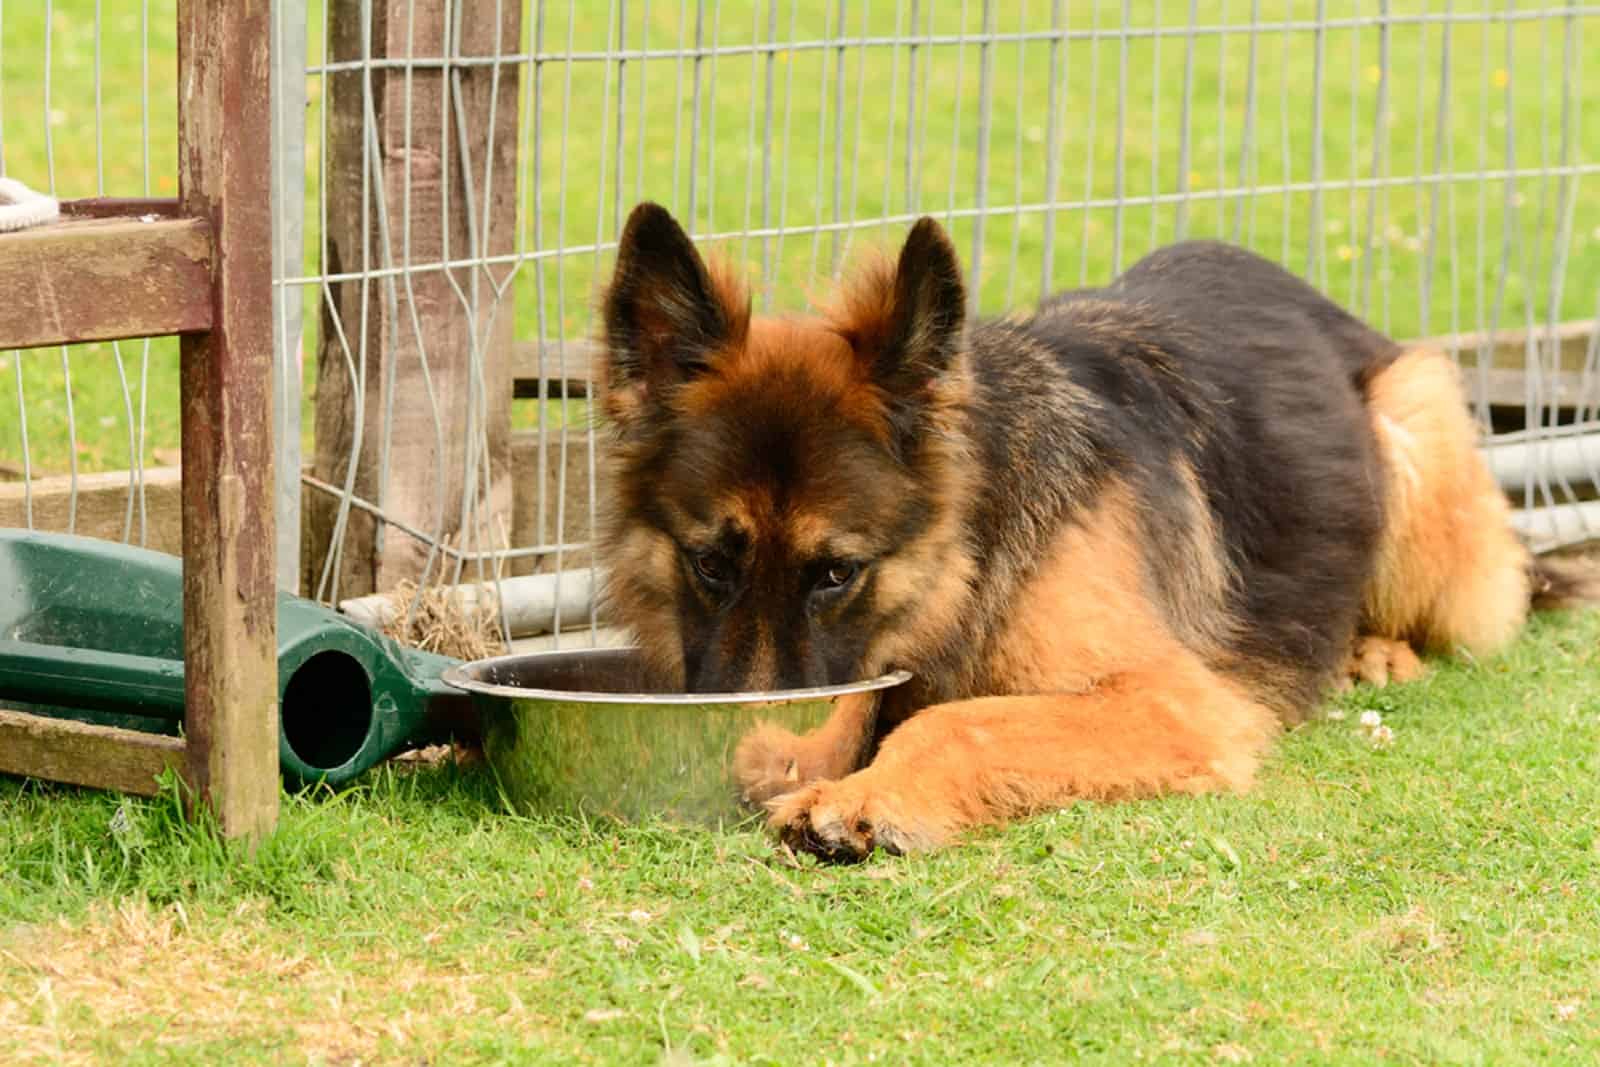 german shepherd dog drinking water from a bowl in the yard